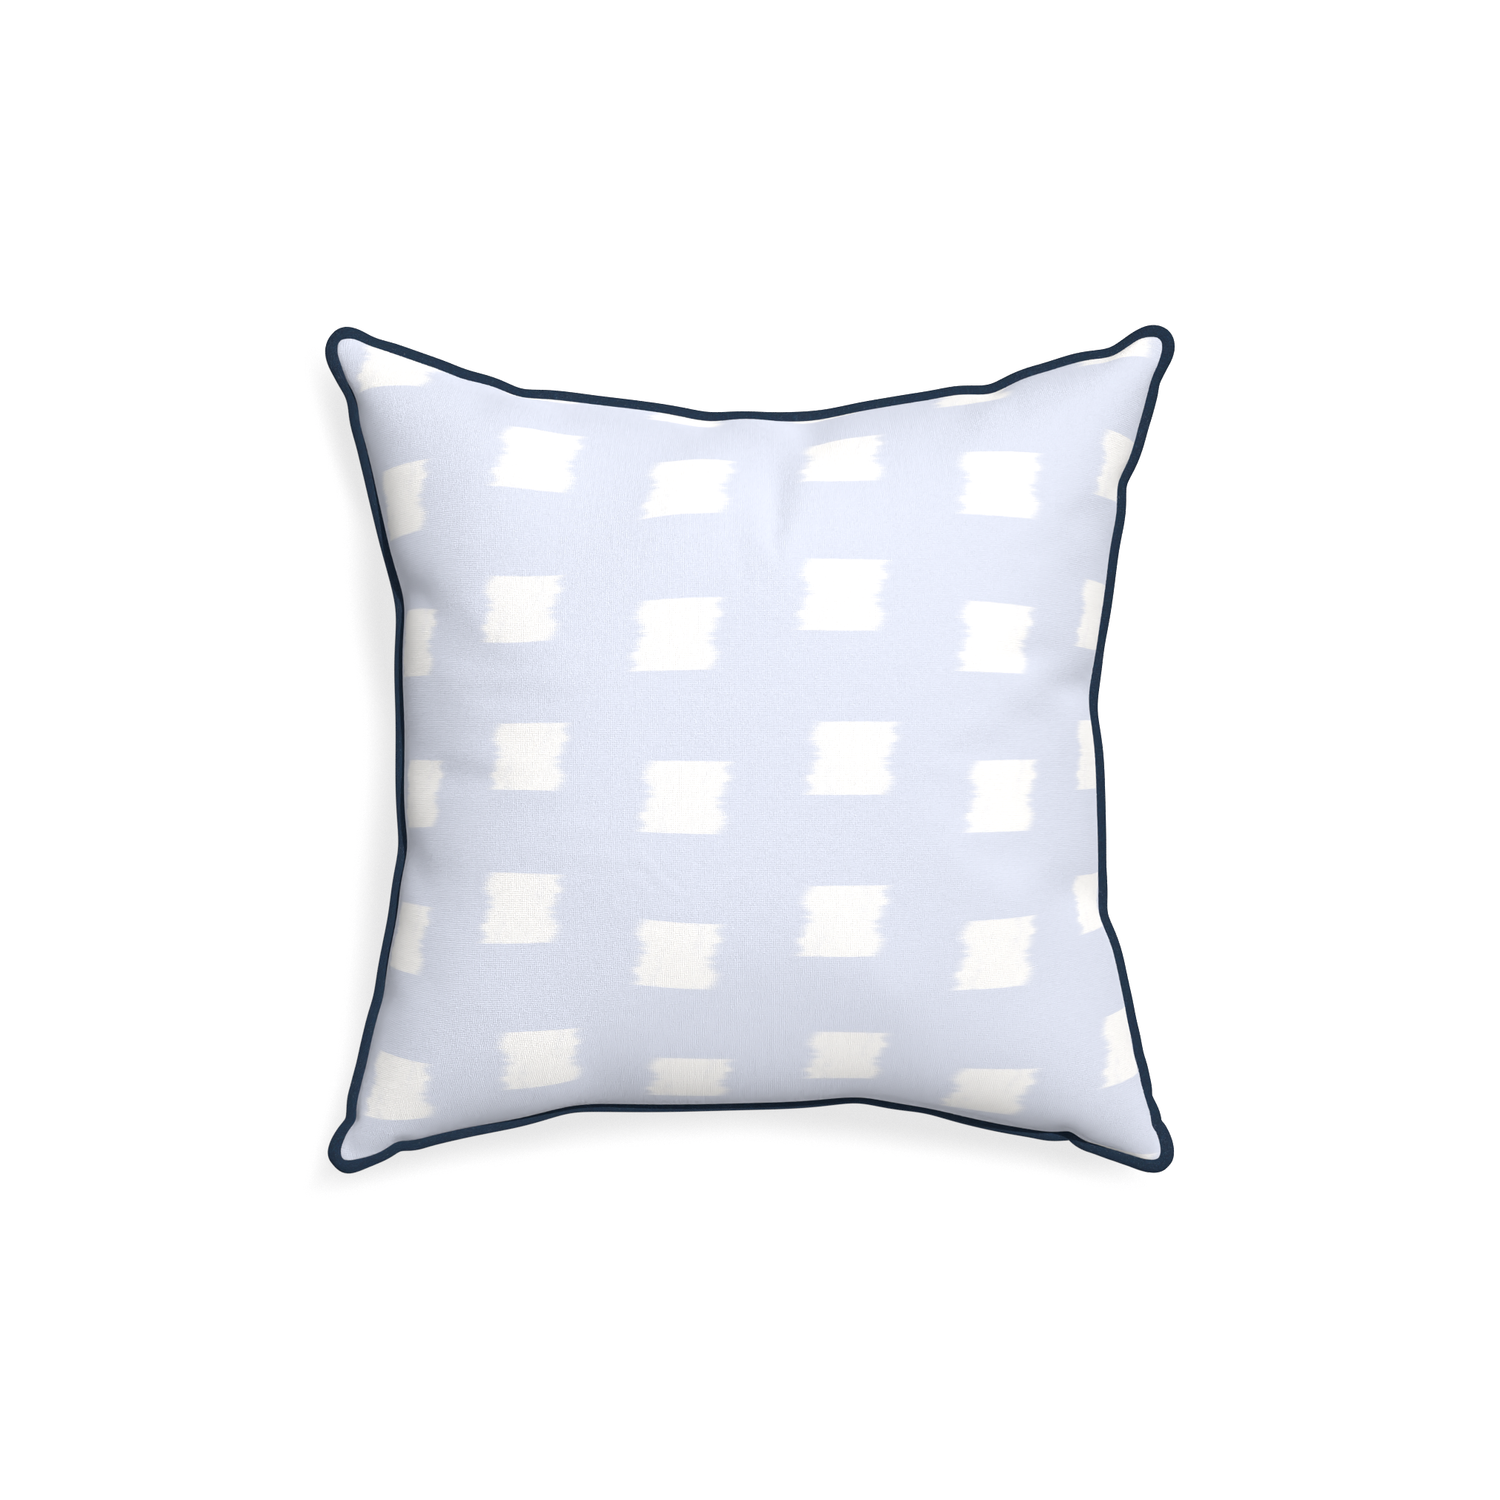 18-square denton custom sky blue patternpillow with c piping on white background